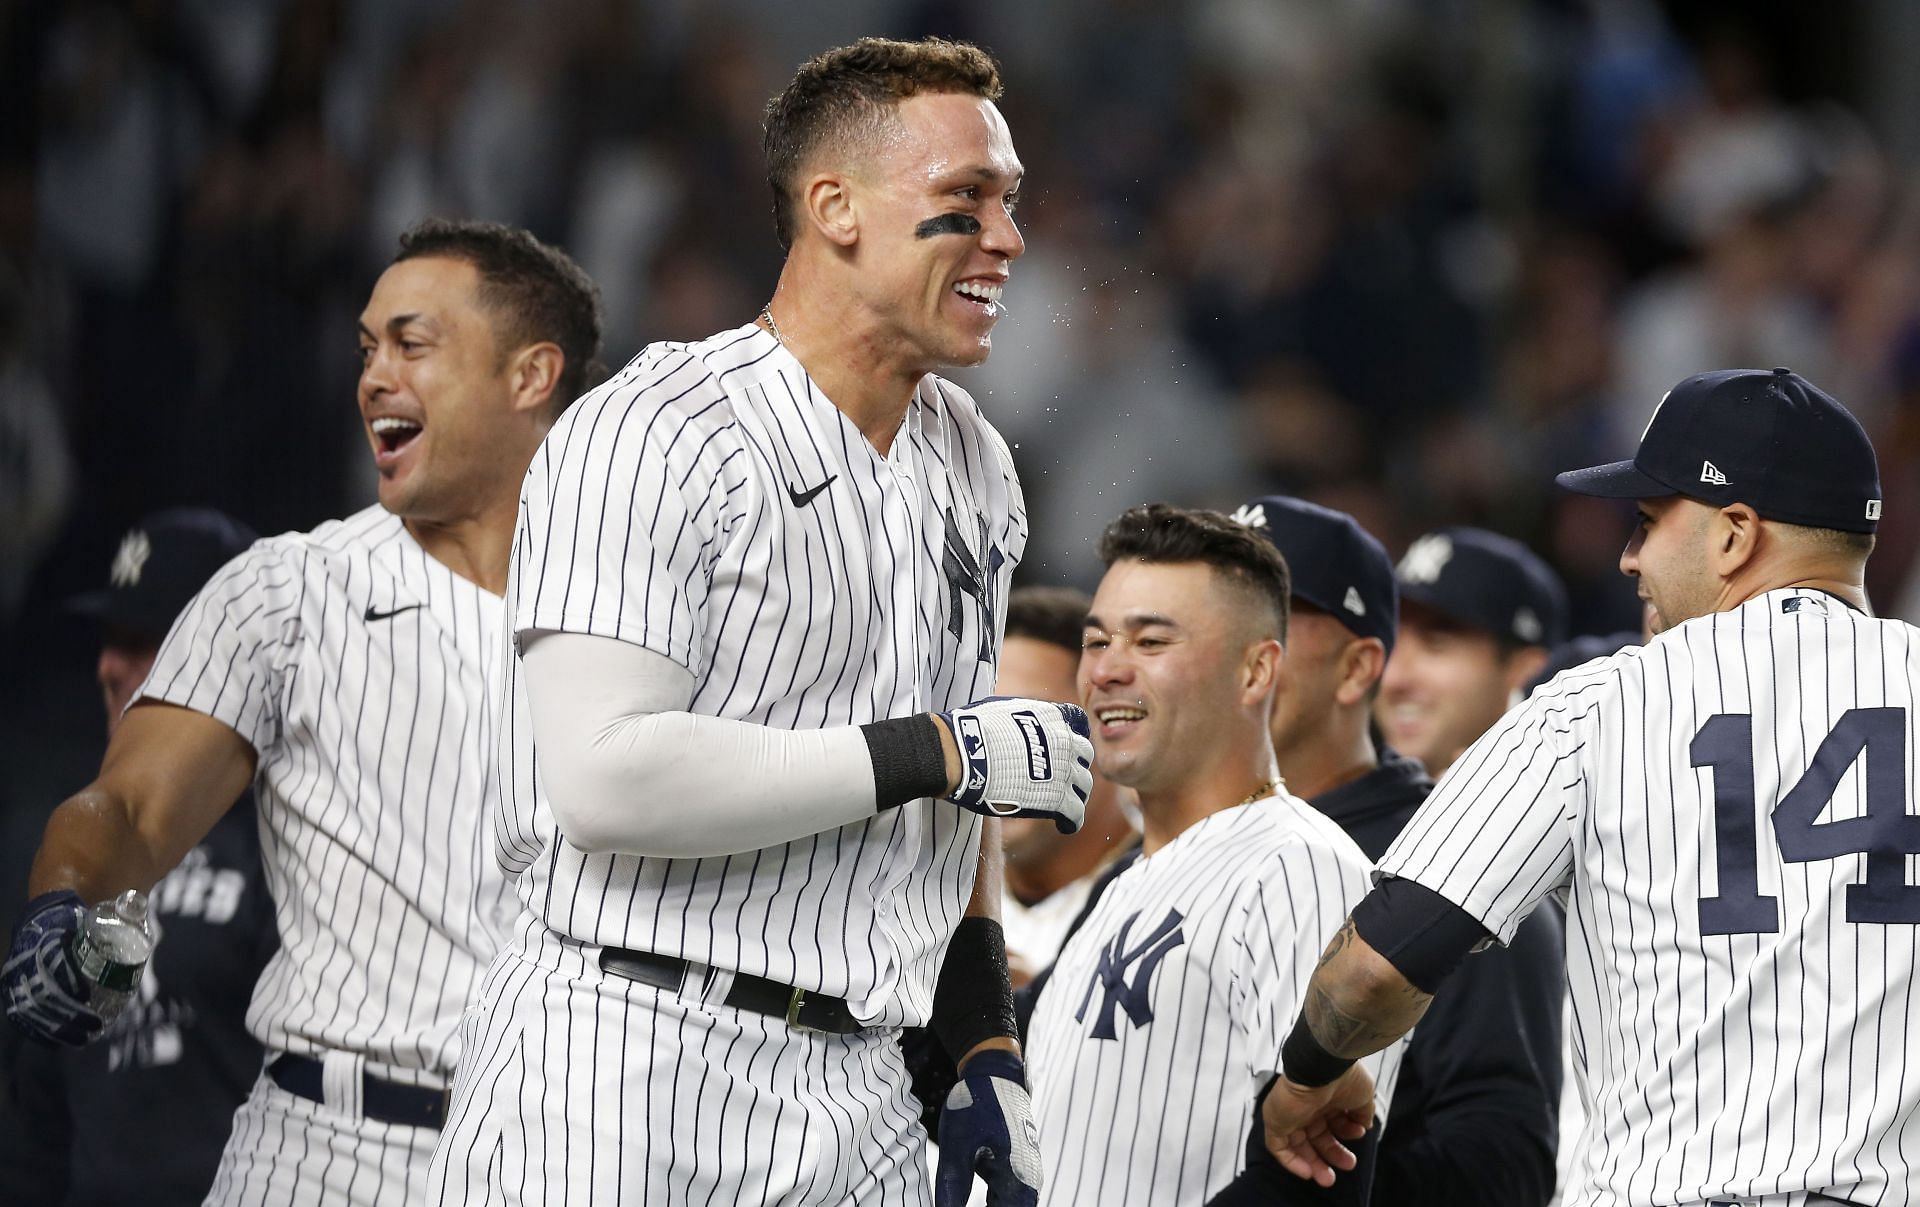 Judge of the New York Yankees celebrates a three-run walkoff bomb that pushed the Yankees past their division rival, the Toronto Blue Jays.